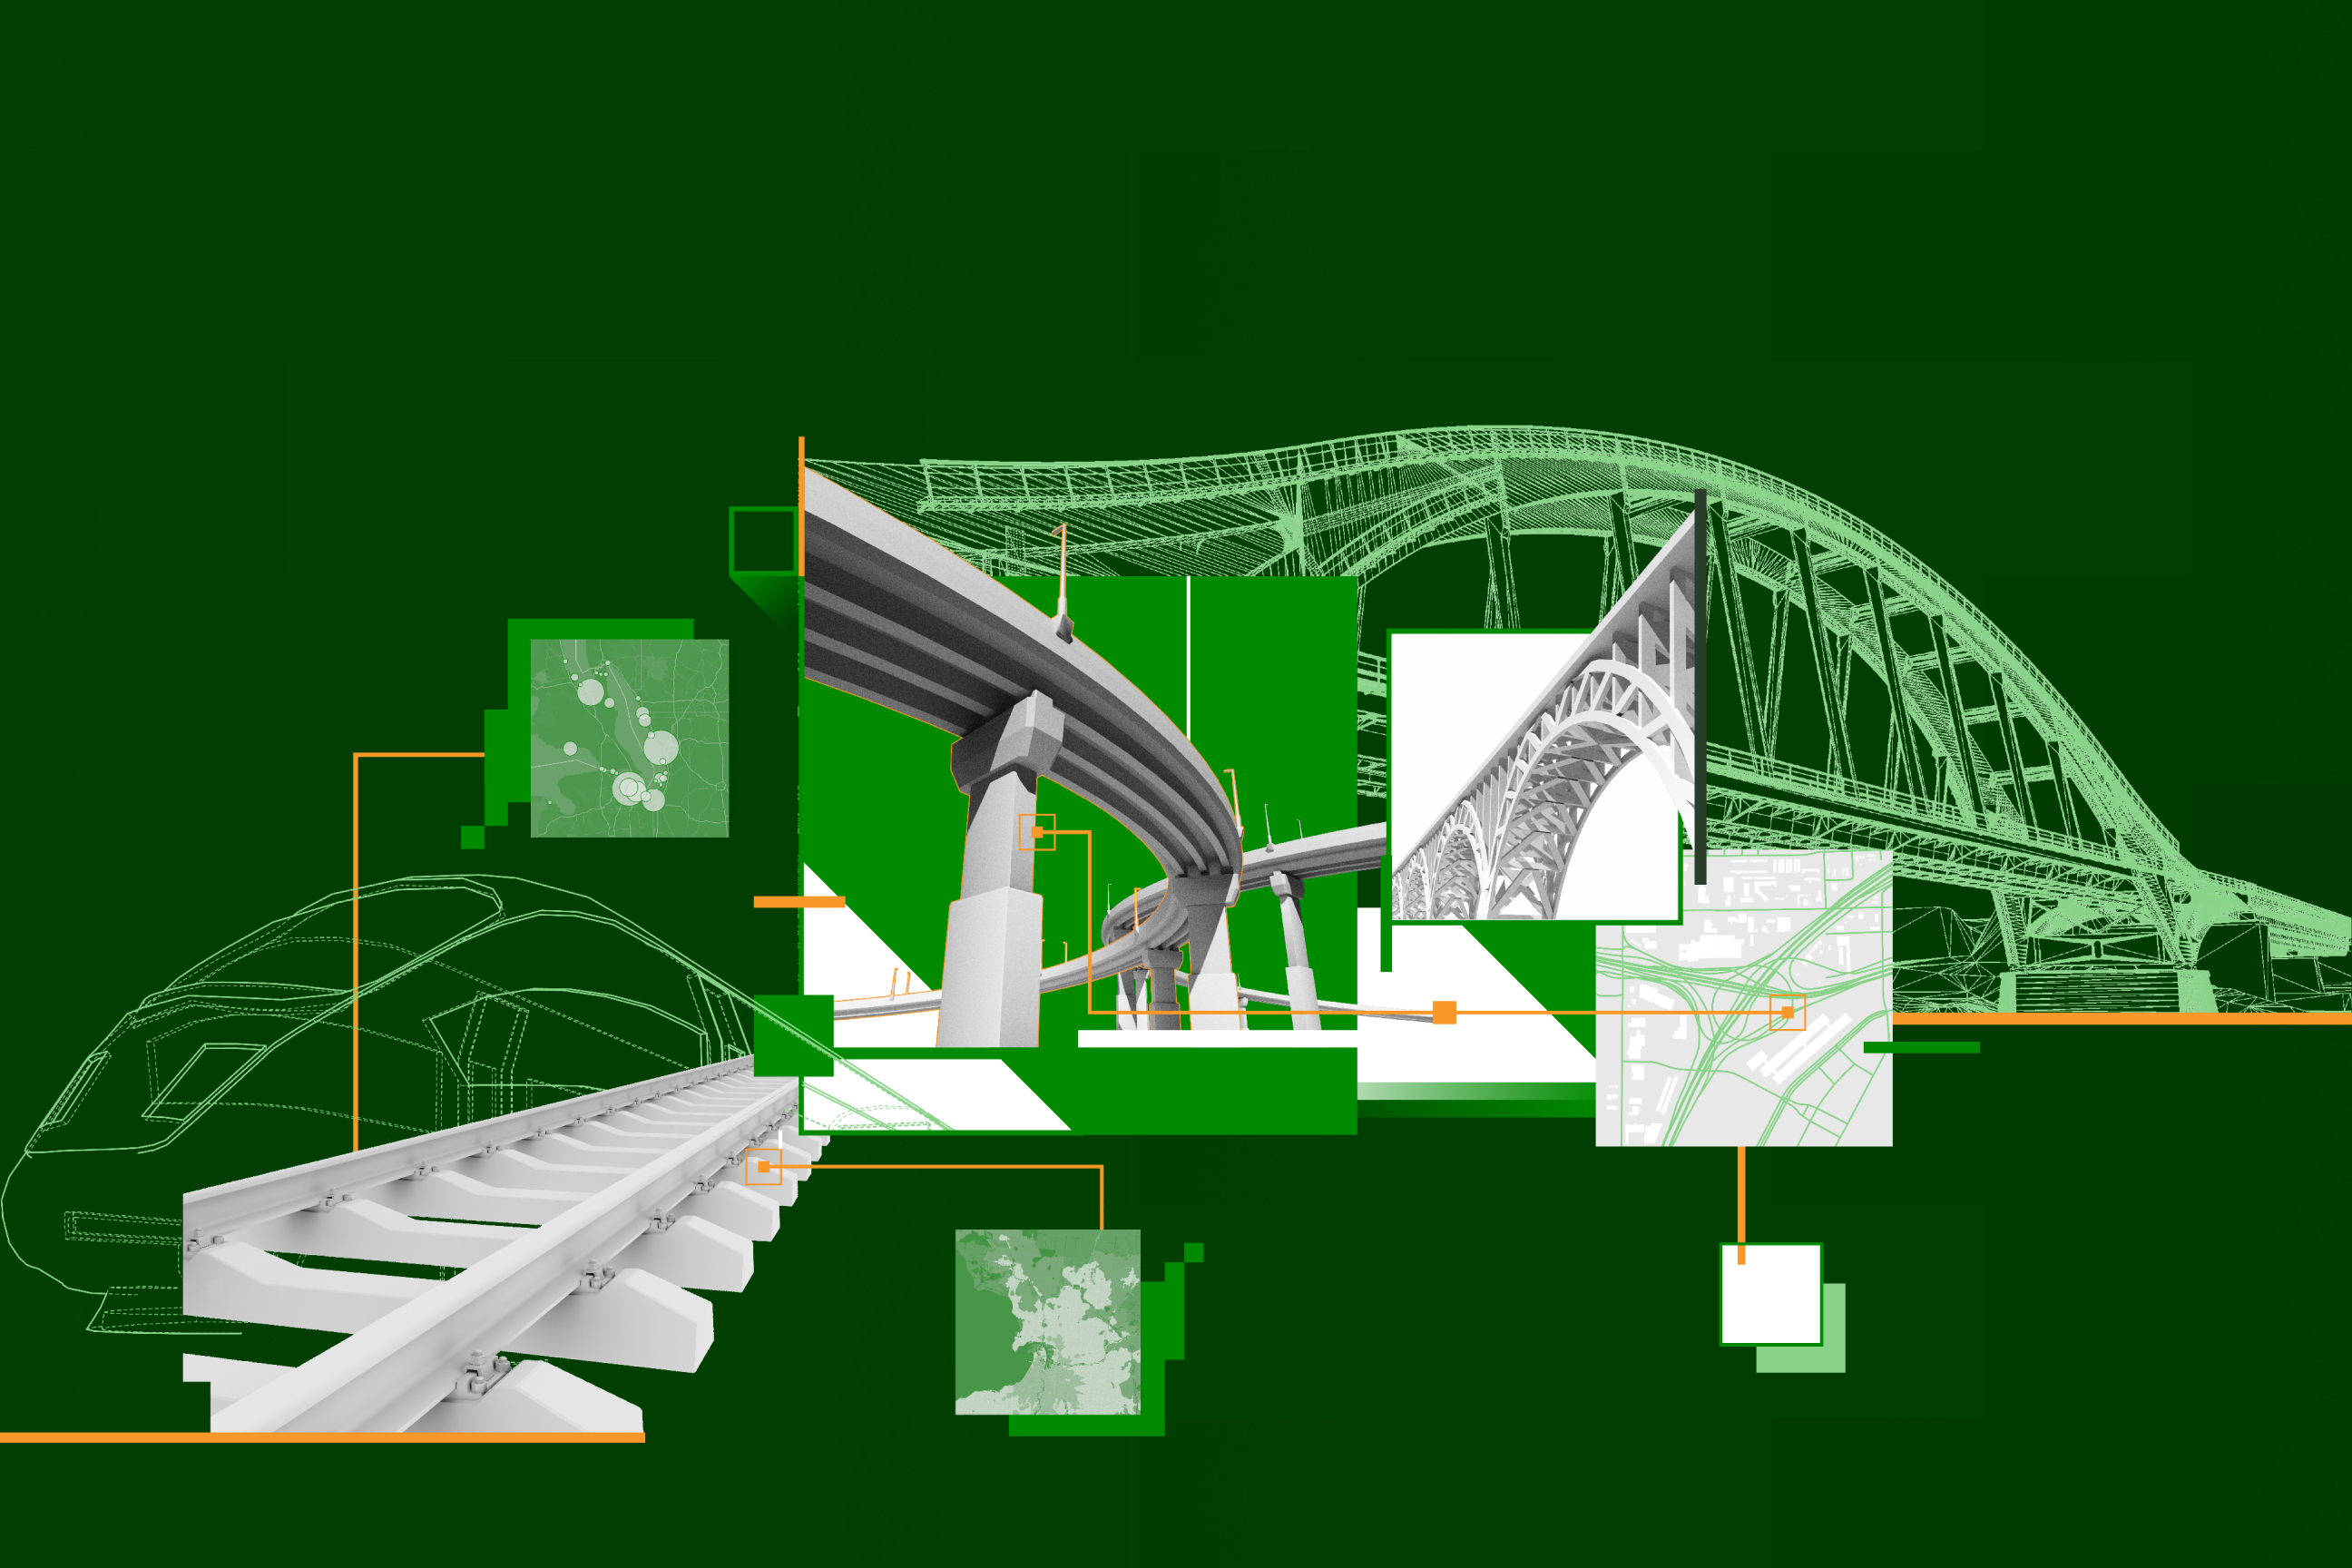 Digital models and renderings of bridges, highways, and railroad tracks overlaid with three images of different maps 